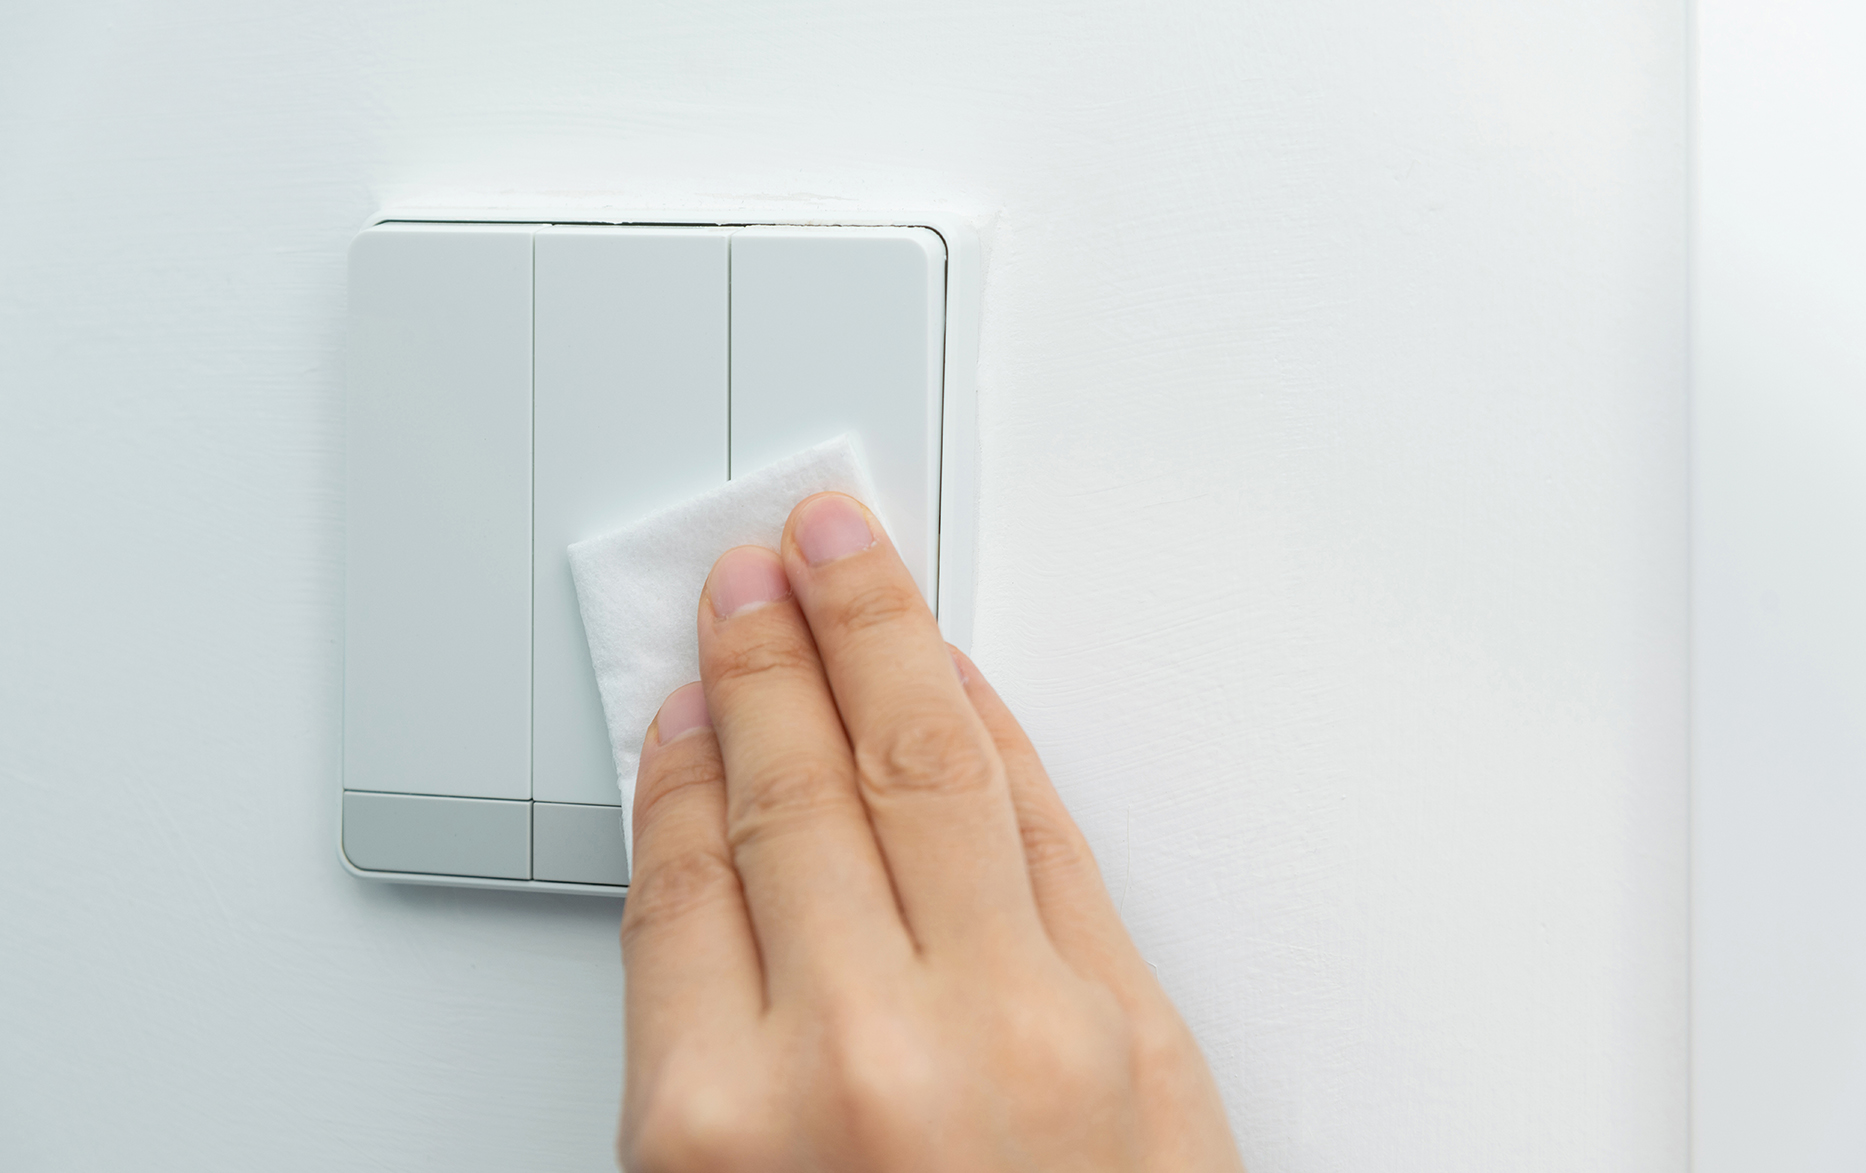 How to Disinfect Door Handles and Light Switches